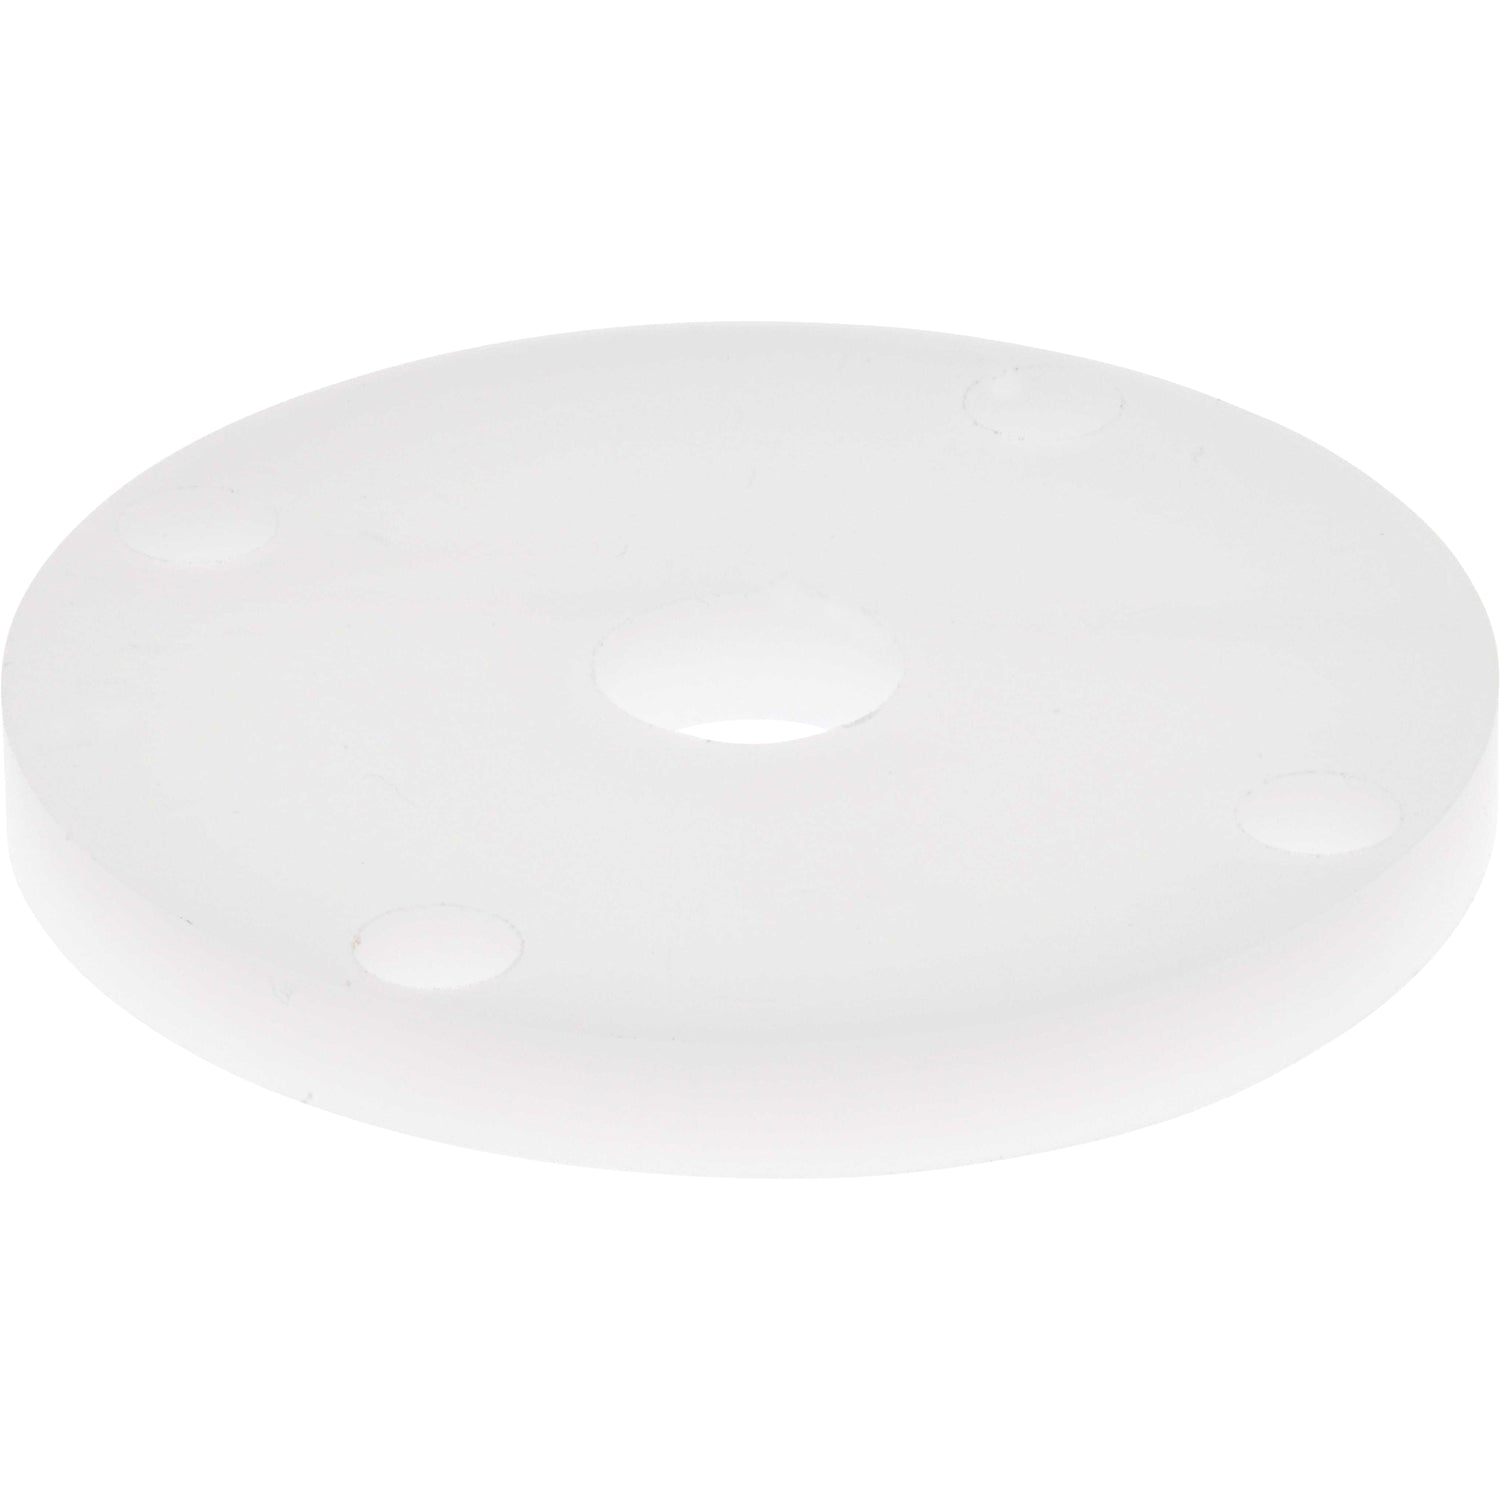 White plastic disk shaped part with four evenly spaced through holes on outer diameter and one larger through hole in the center of the part. Part shown on a white background. 